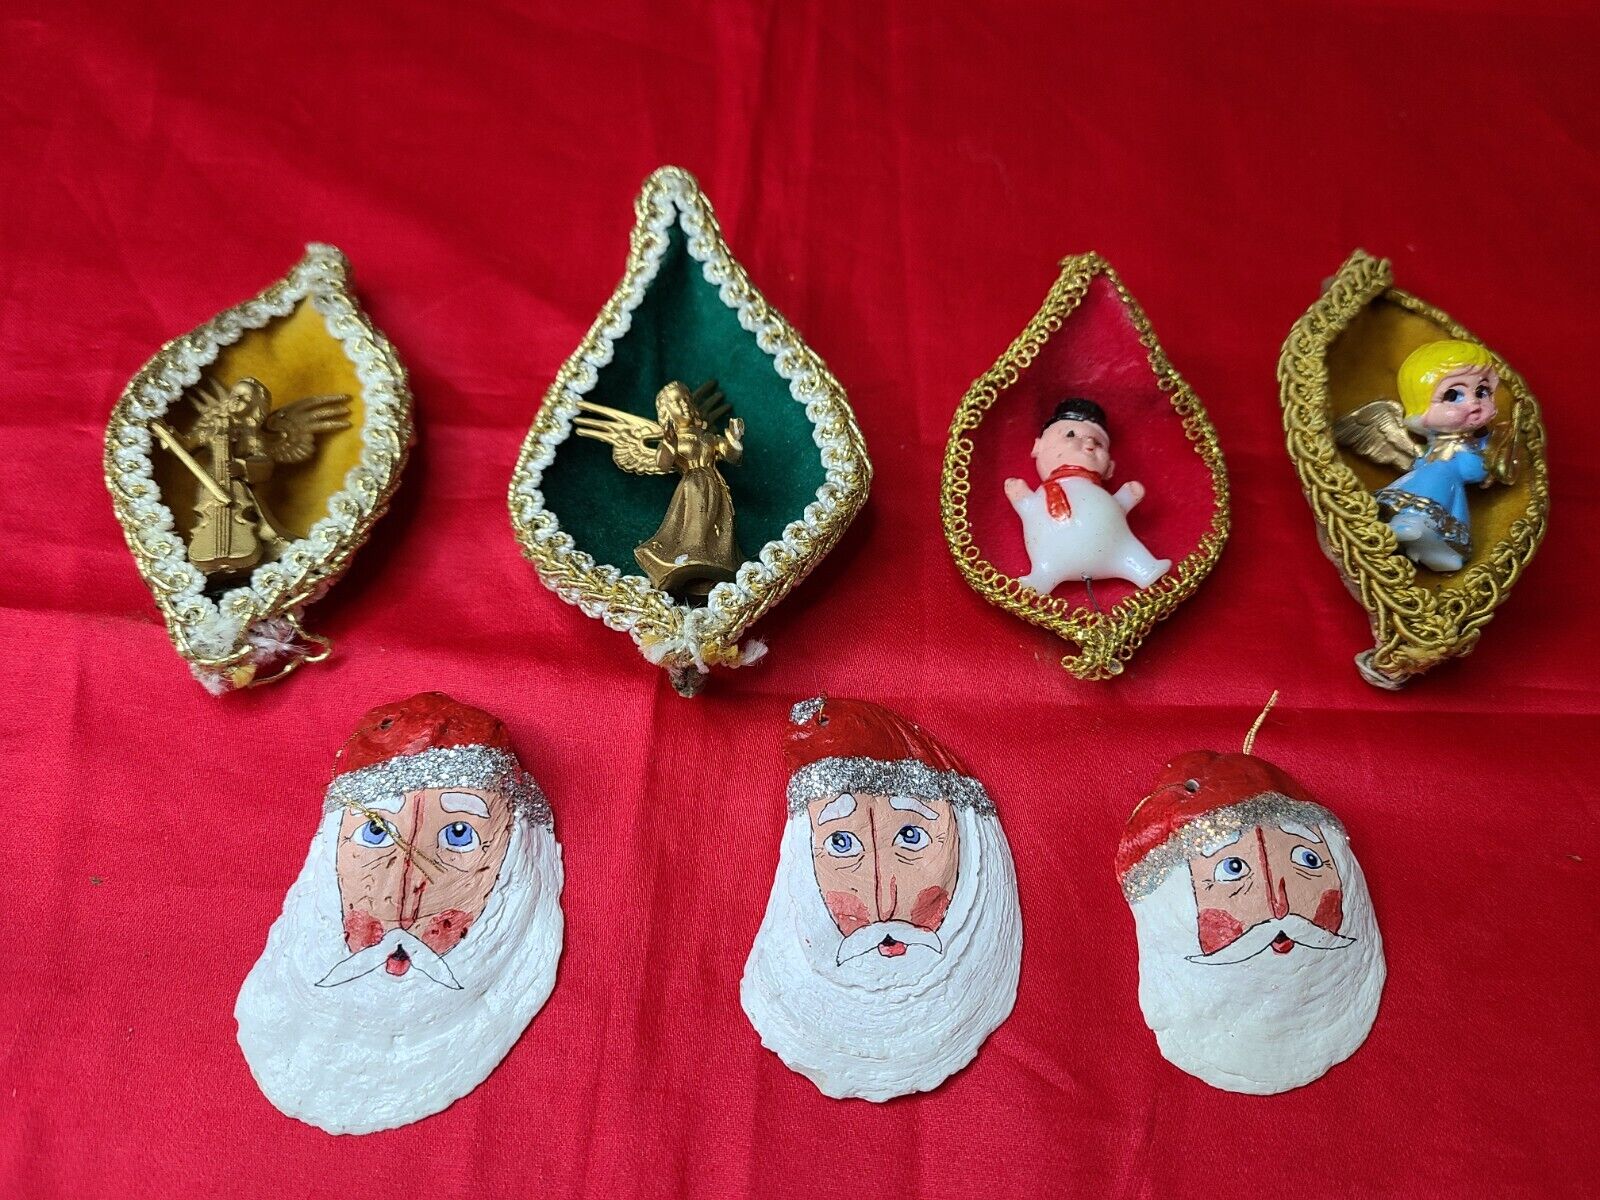 4 Vtg Handcraft XMAS Angels Snowman milkweed pods 3 Signed OysterShell Ornaments